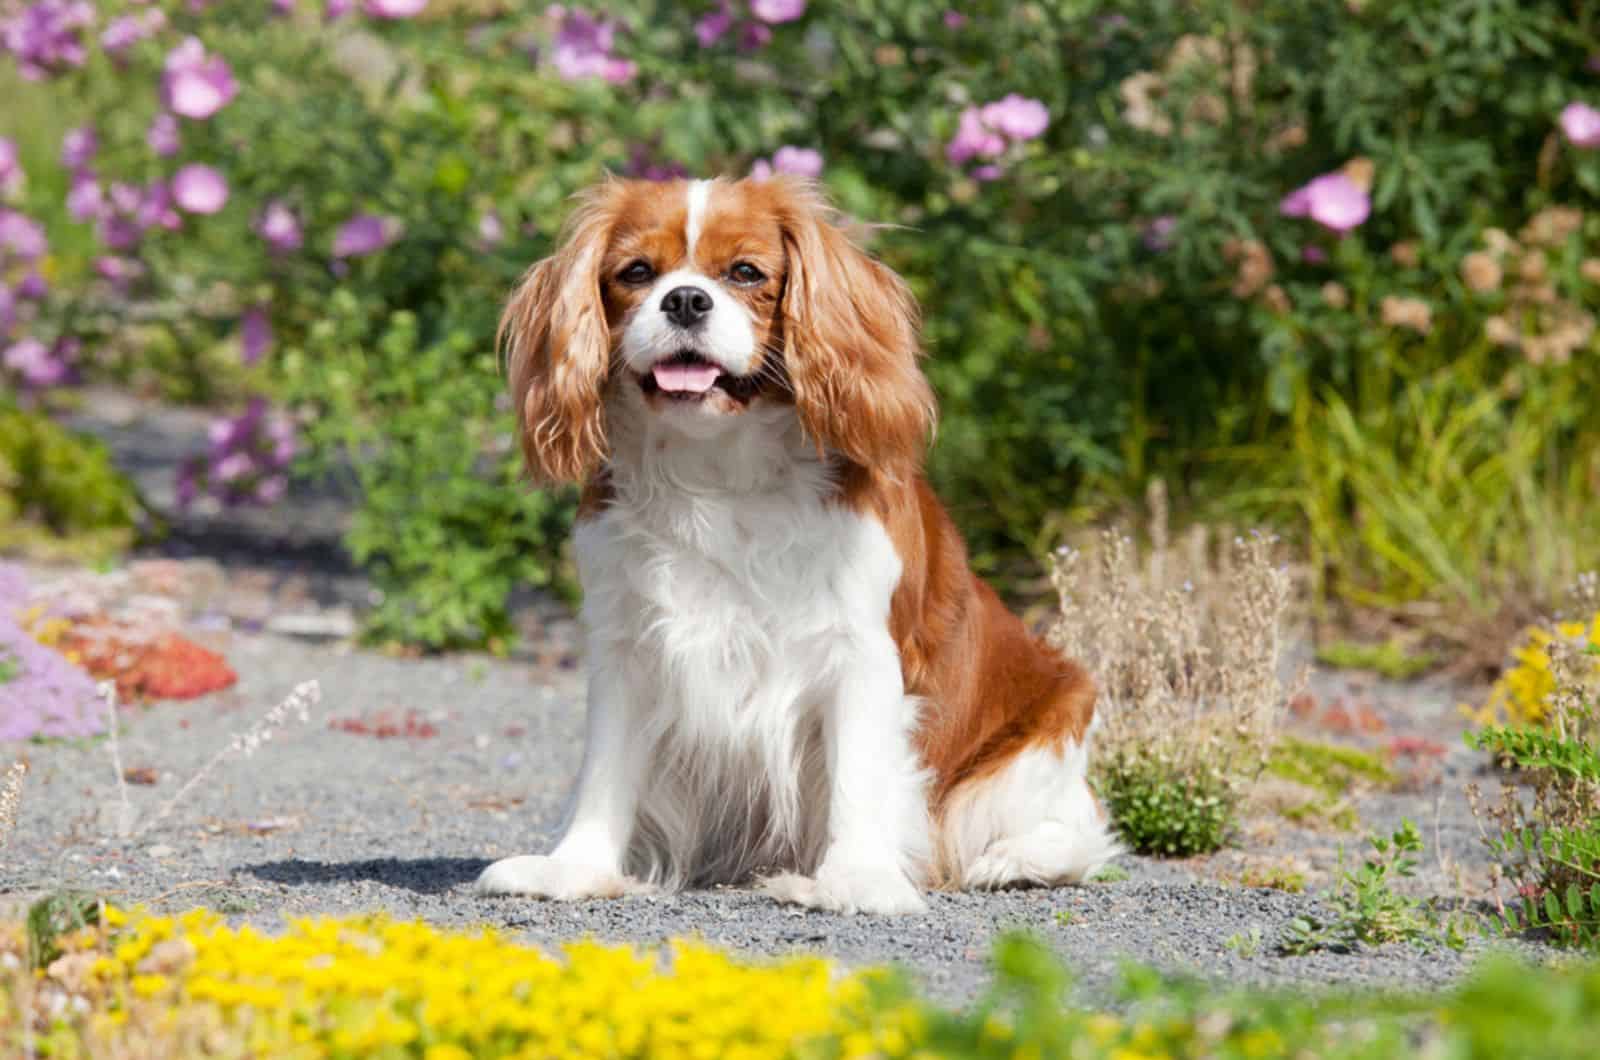 cavalier king charles spaniel sitting in the garden surrounded by flowers